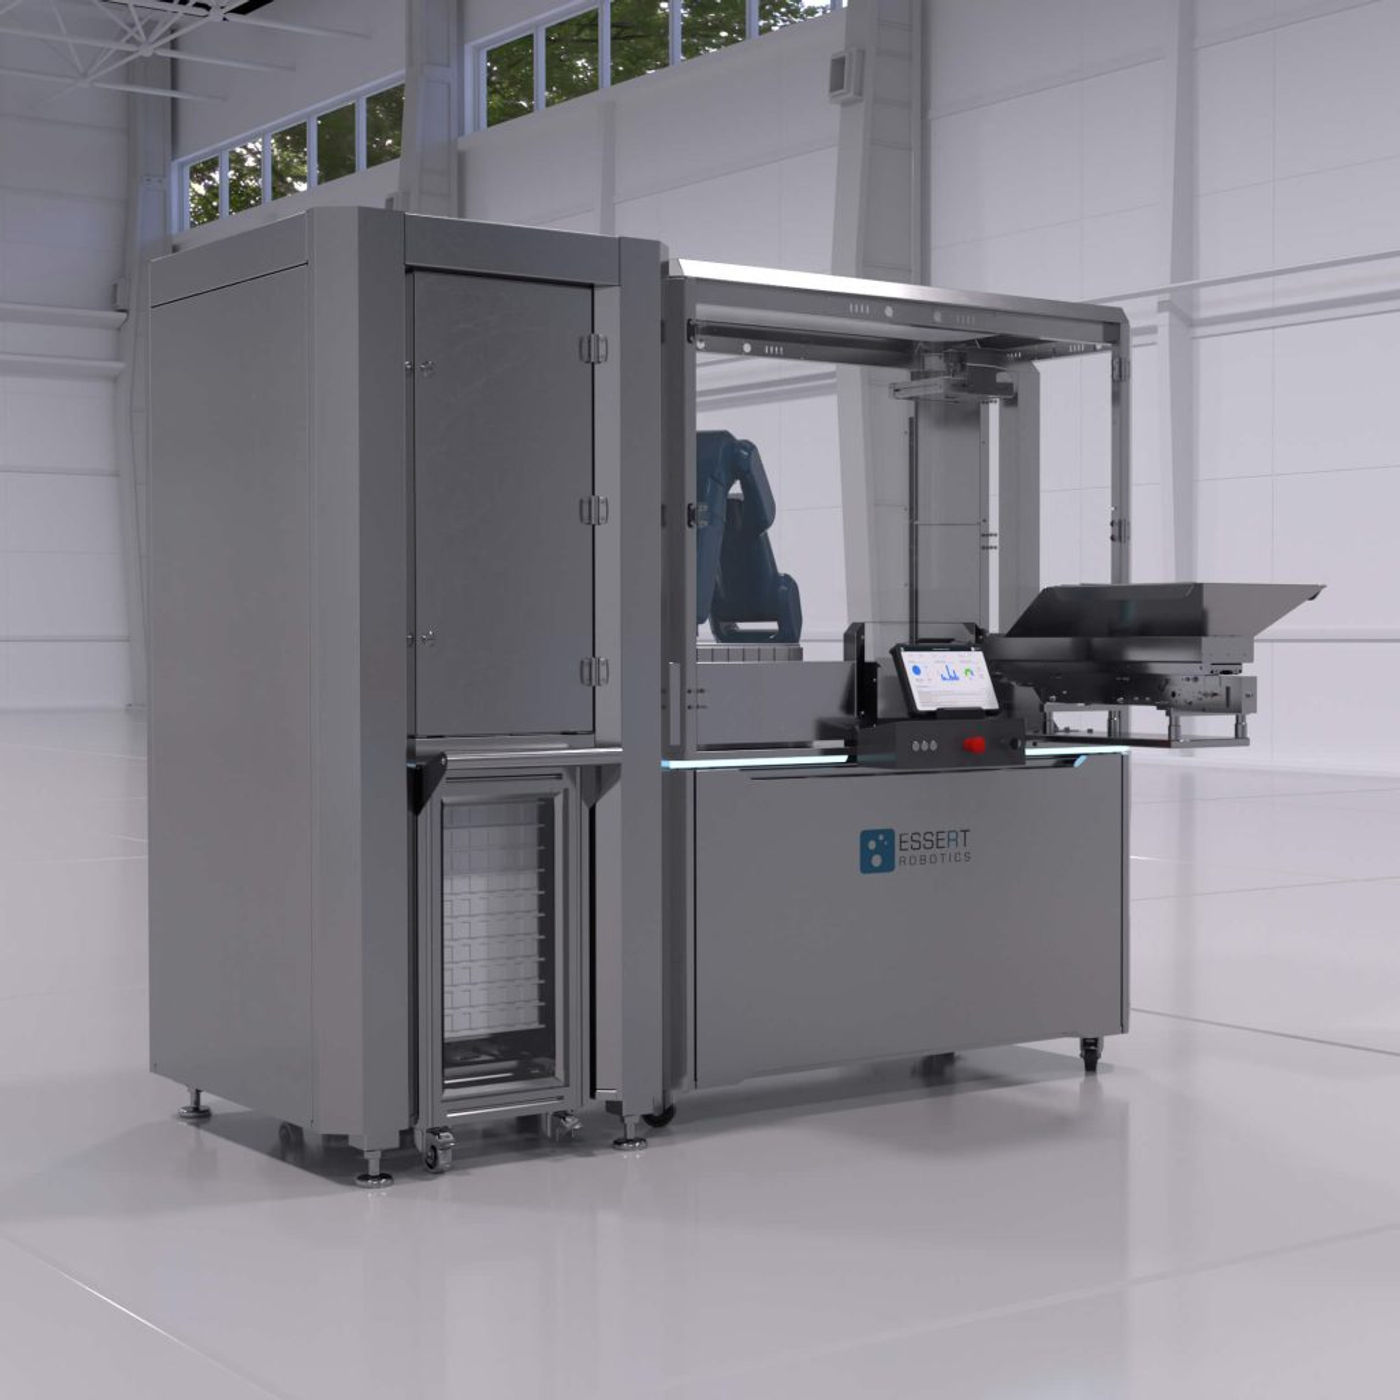 The ADVANCED Robotic Workstation in the GMP-compliant design meets strict cleanliness standards, enabling operation in ISO class 5 clean rooms for lab automation and medical device assembly.  | © ESSERT Robotics